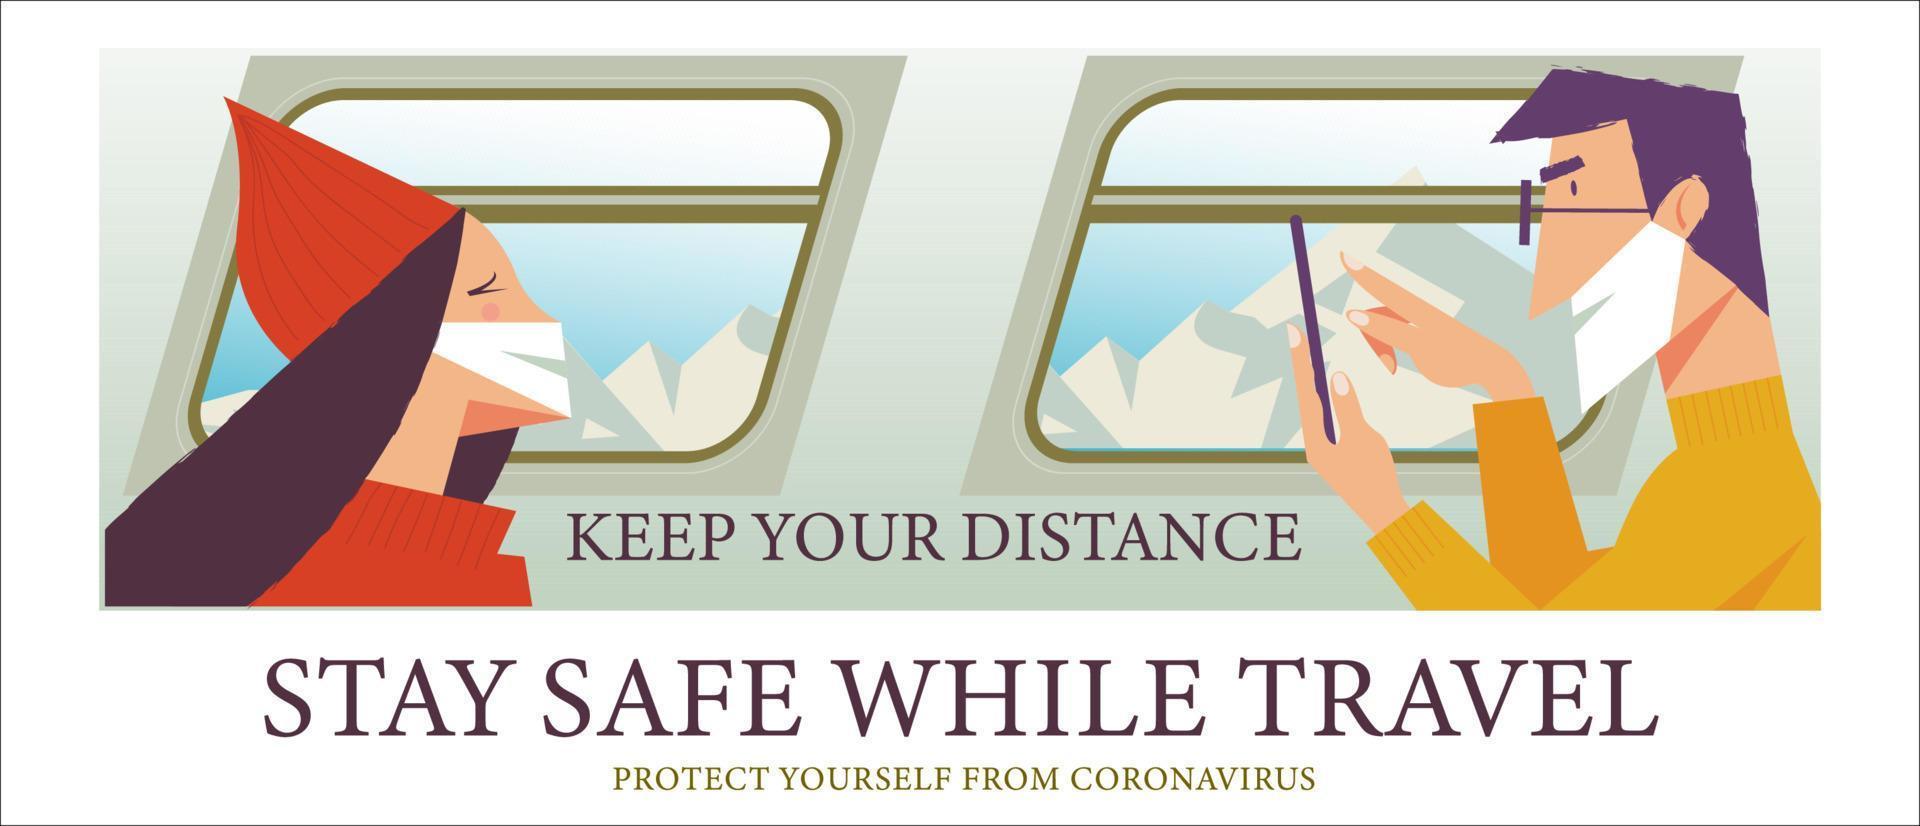 Stay safe while traveling. Vector poster encouraging people to wear masks.